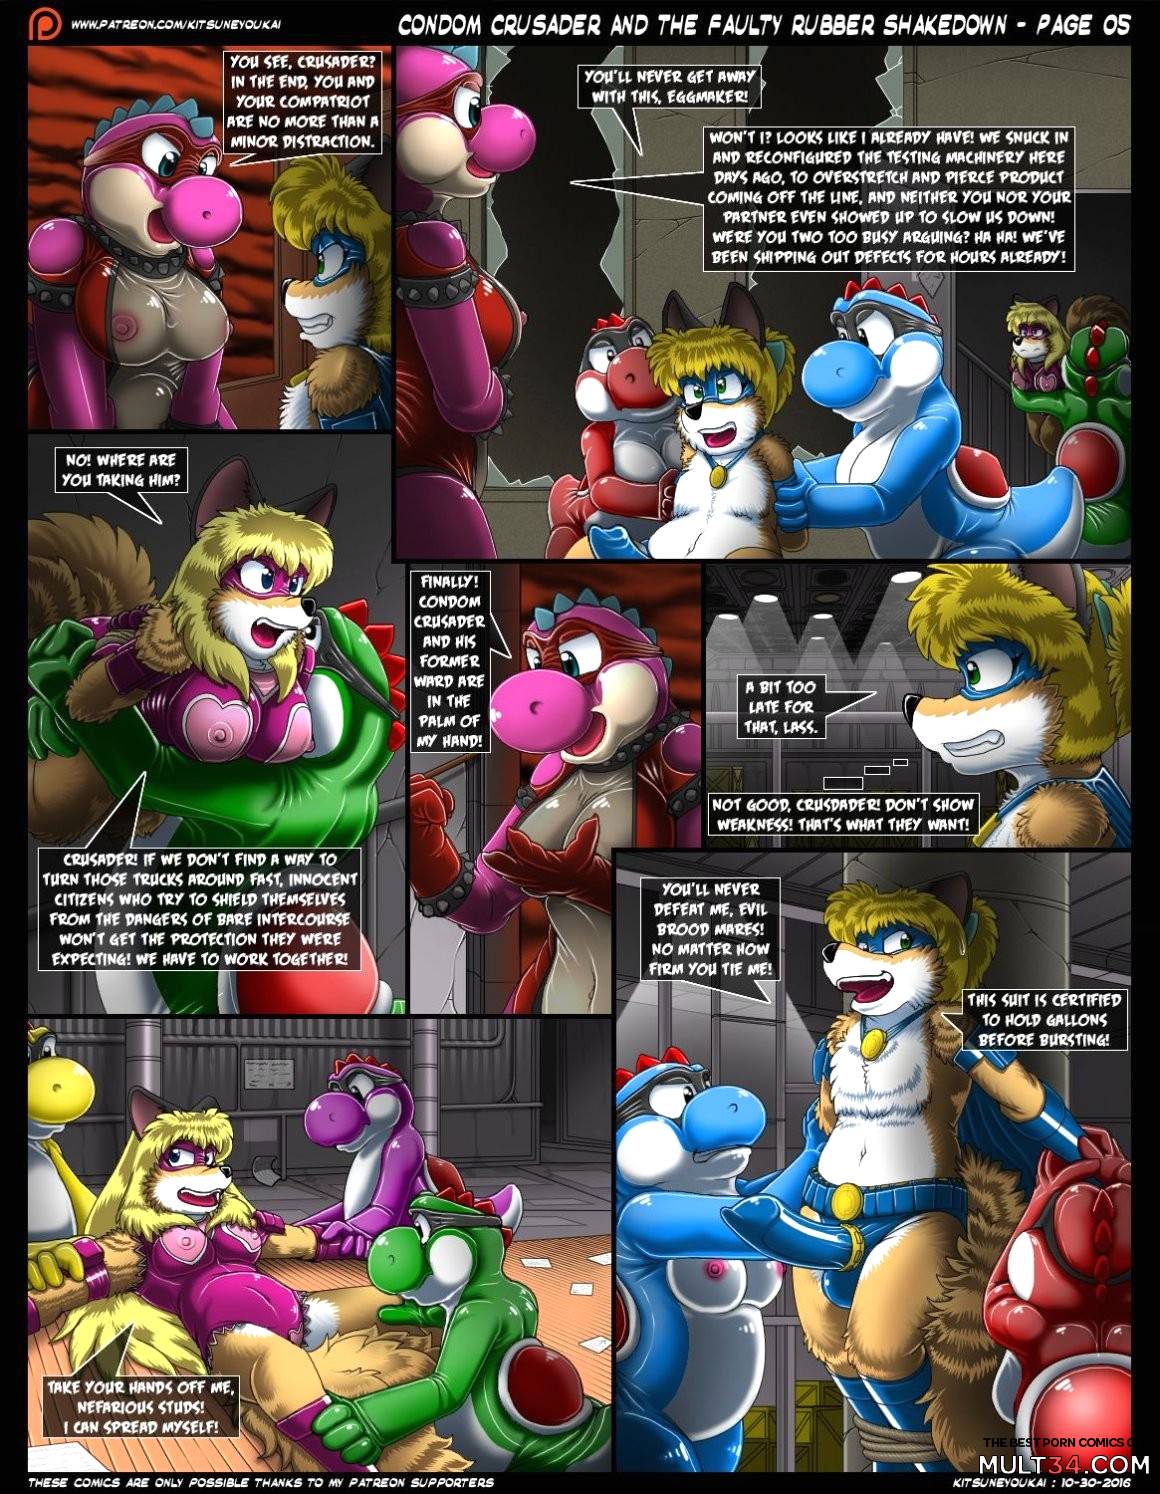 Condom Crusader And The Faulty Rubber Shakedown page 6